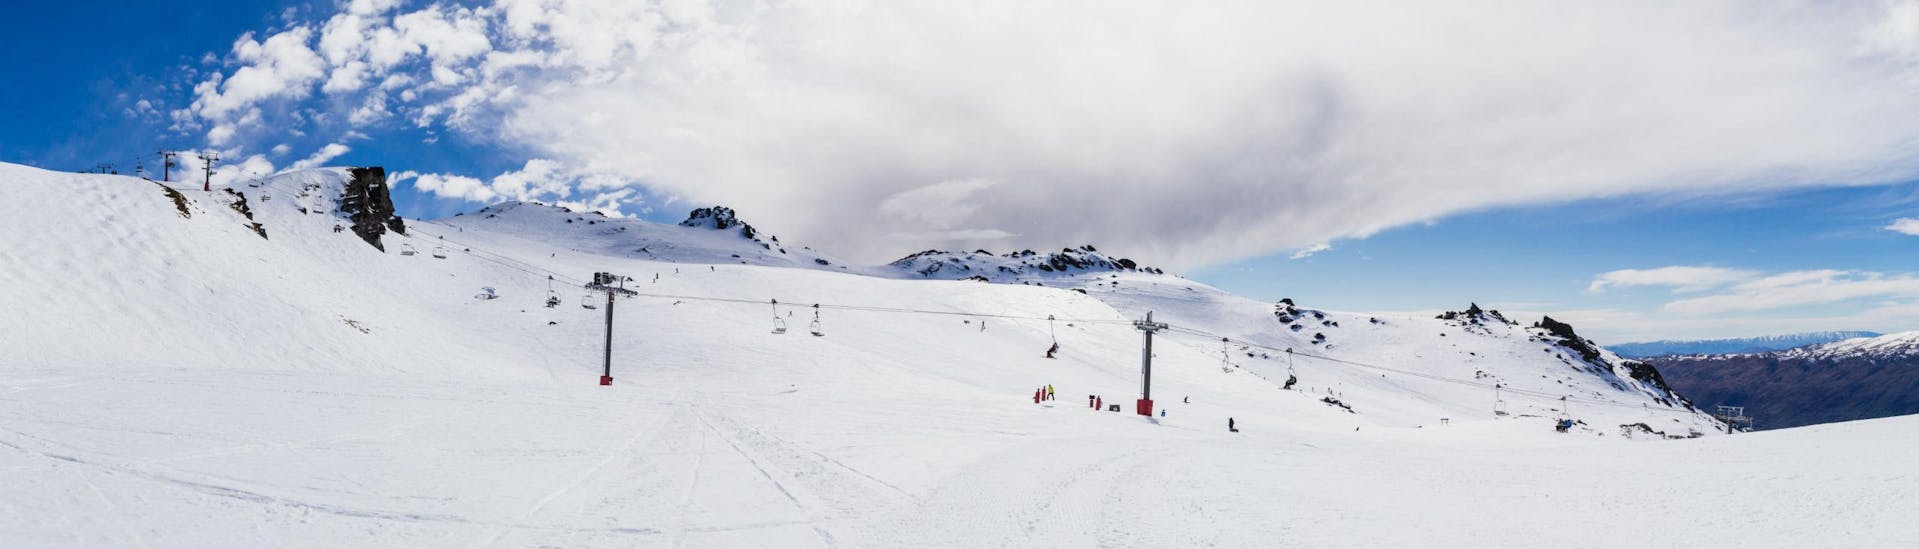 An image of the snow park in the Cardrona Alpine Resort in Otago, where visitors can book ski lessons and learn to ski.